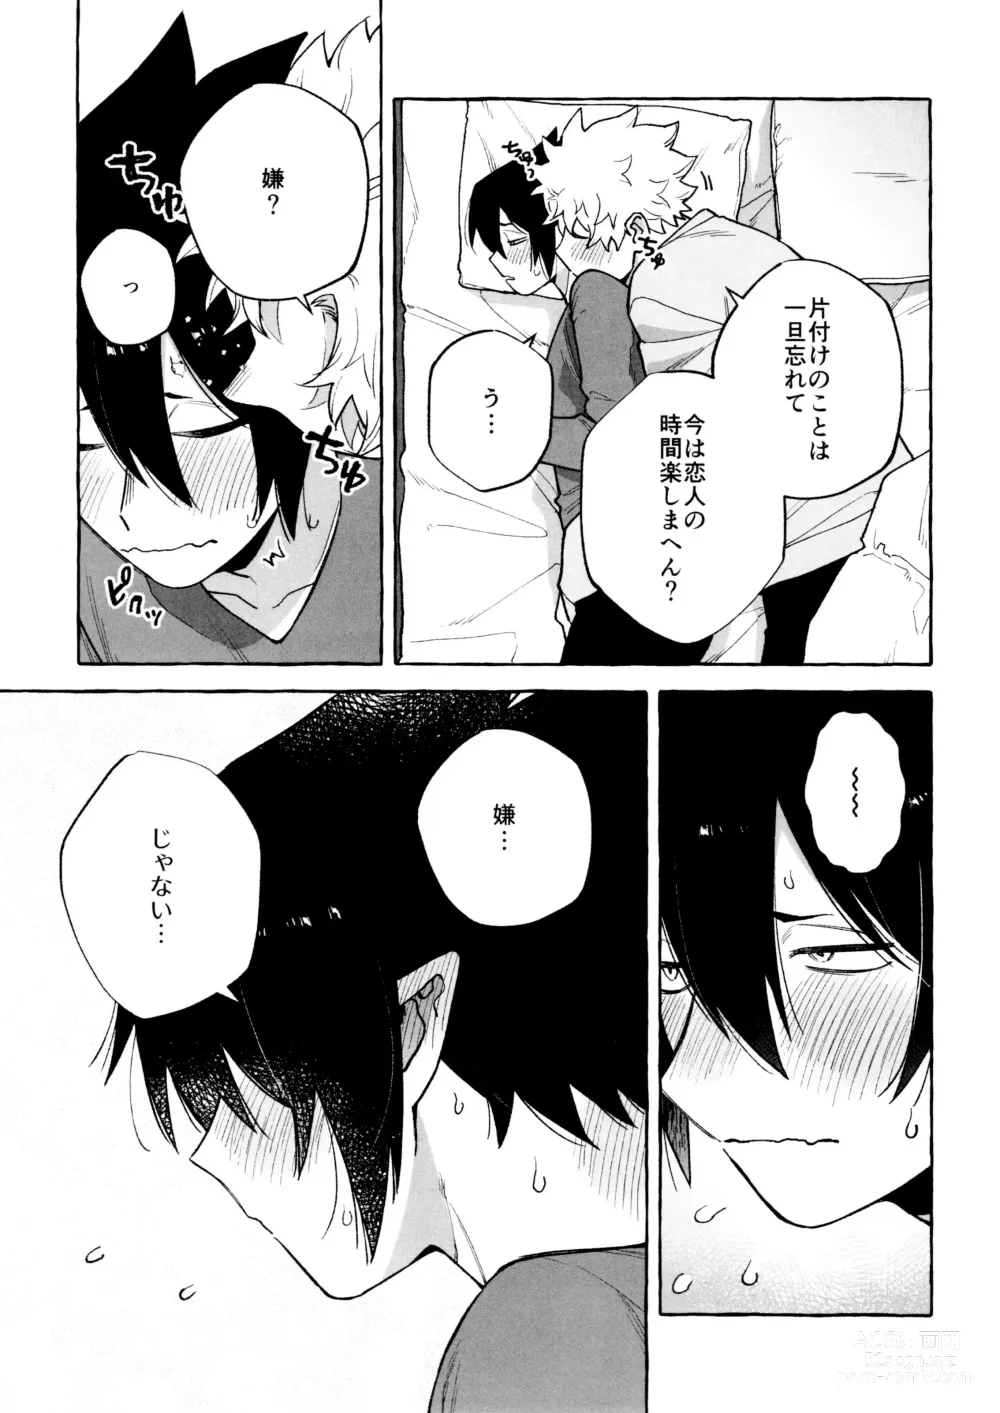 Page 7 of doujinshi Please please